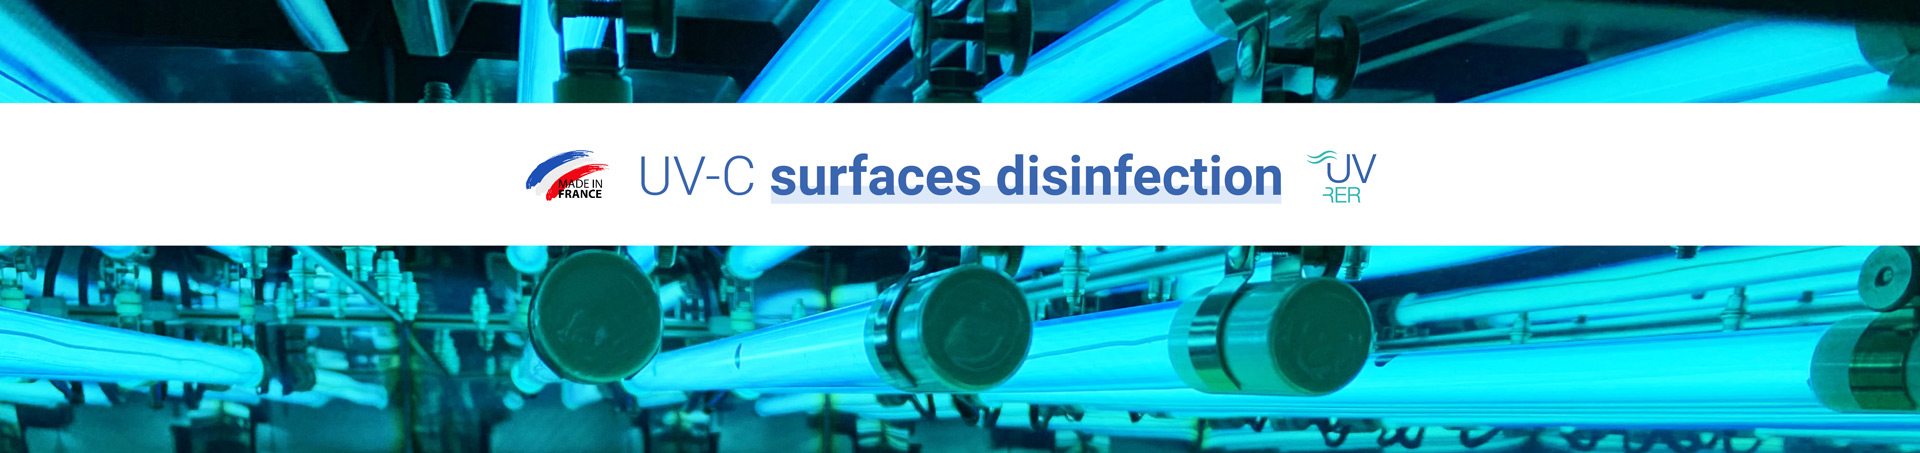 ultraviolet surfaces disinfection